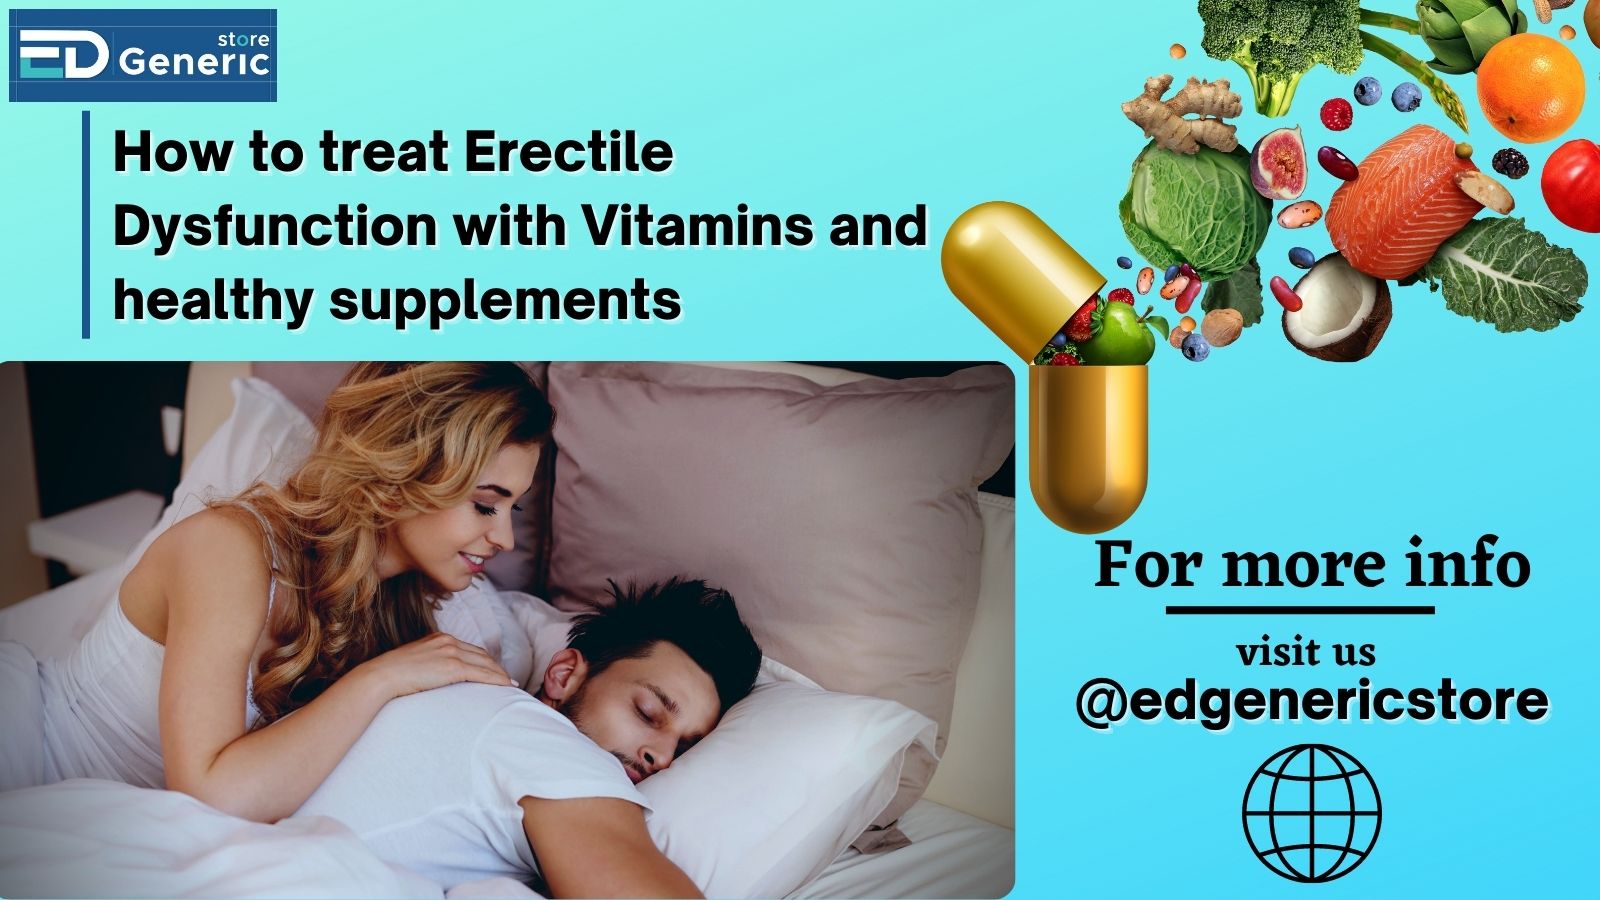 Erectile Dysfunction with Vitamins- Ed generic store